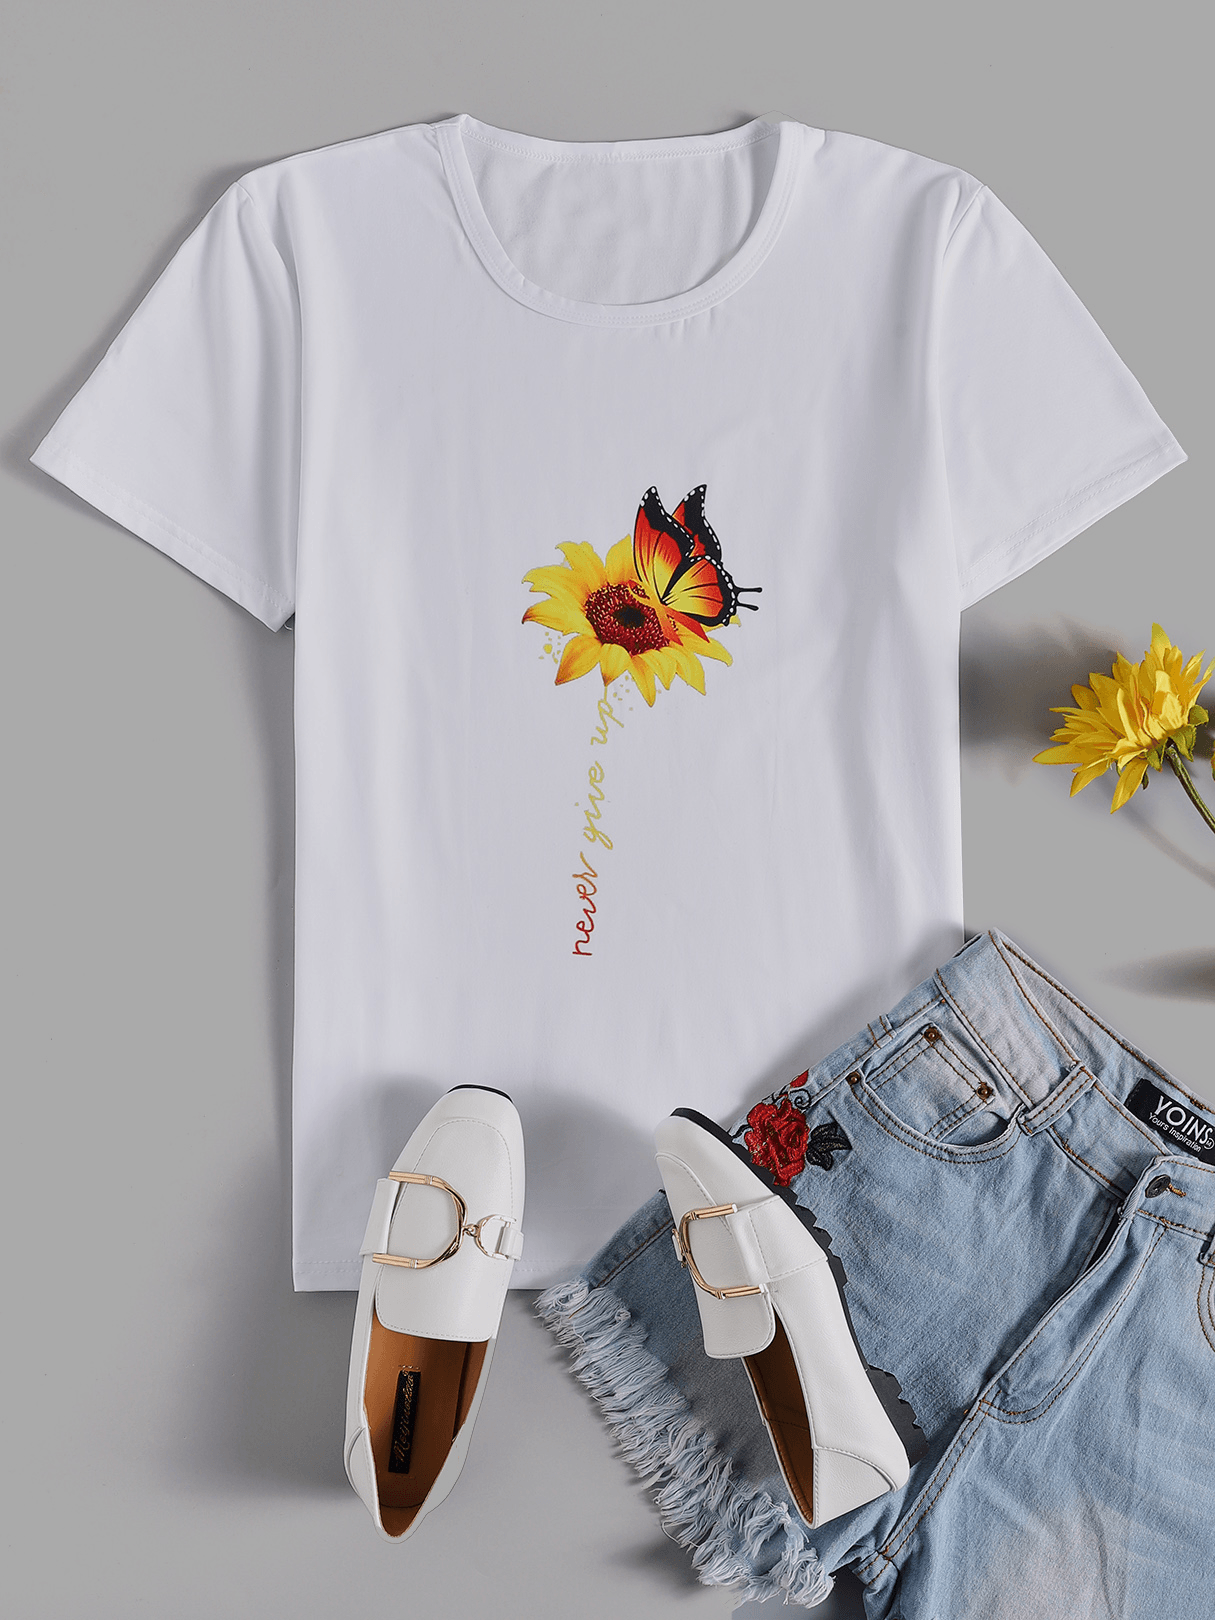 Sunflower and Butterfly Print Crew Neck Short Sleeves Casual Tee